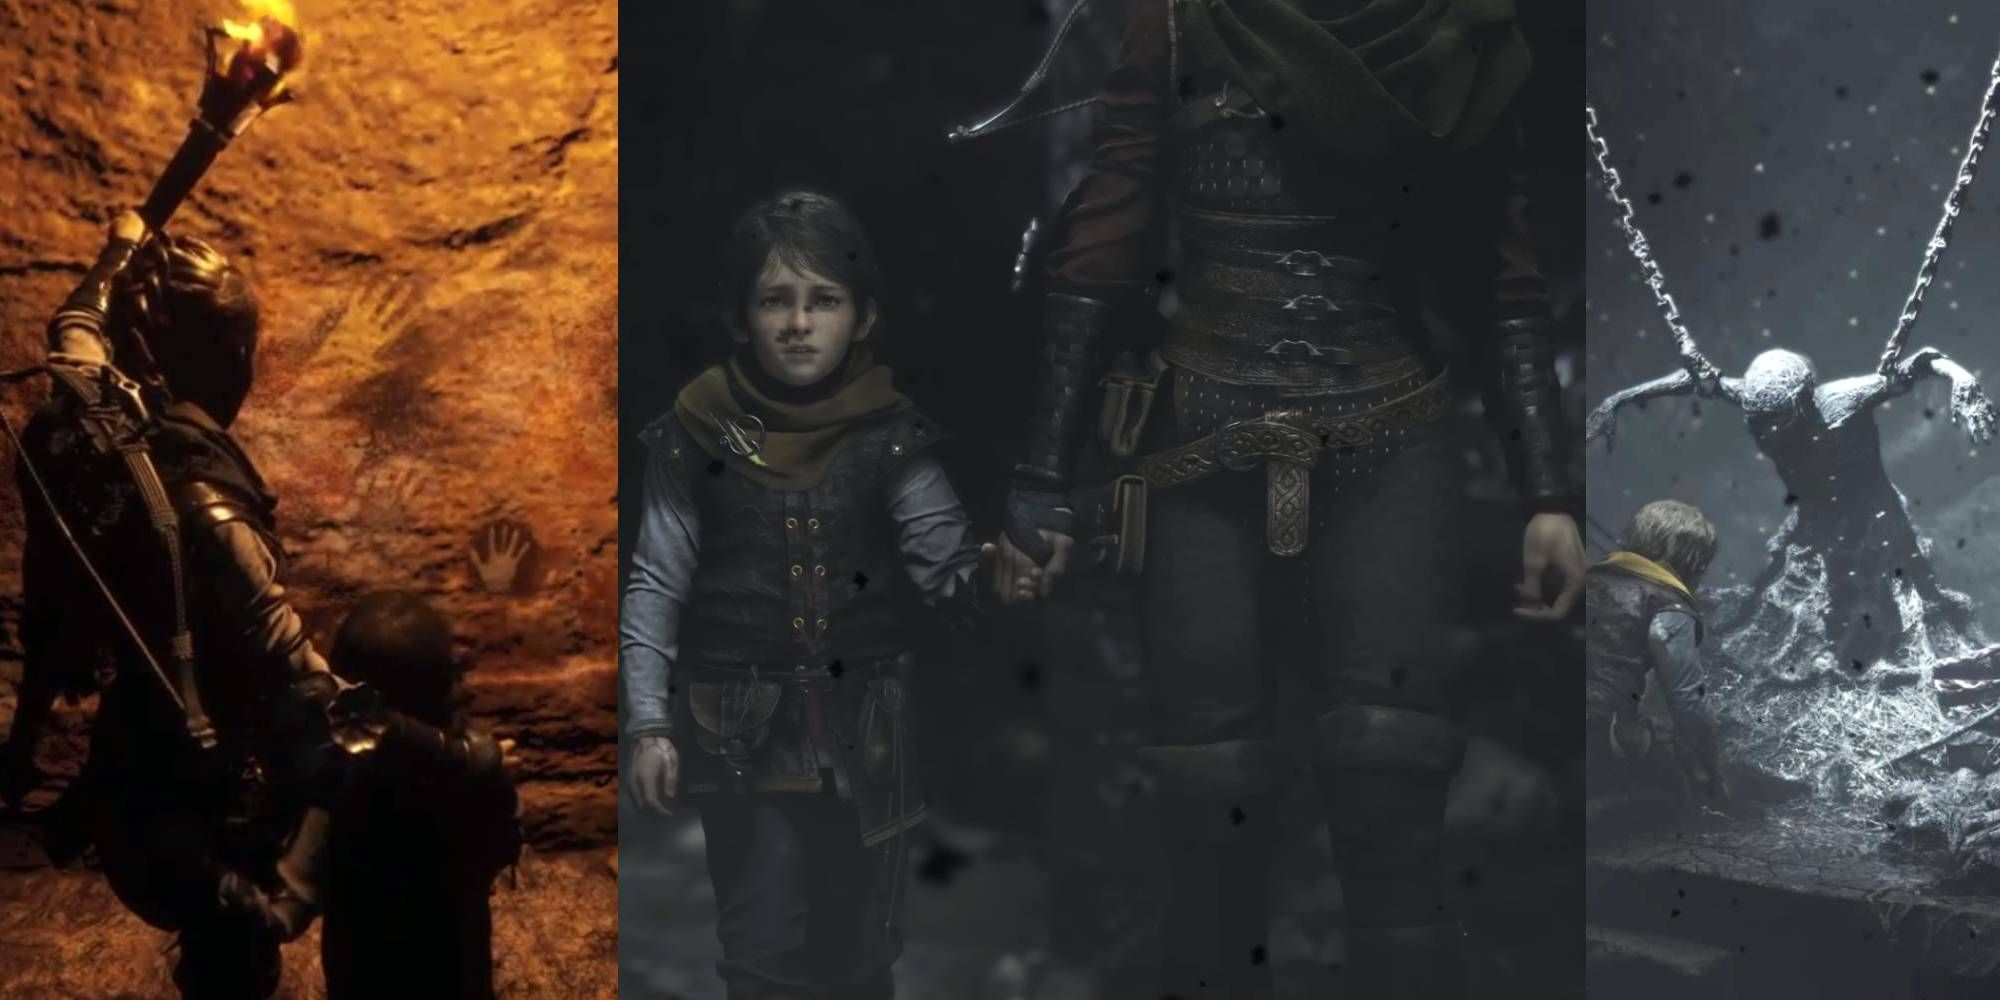 Collage of images from A Plague Tale Requiem